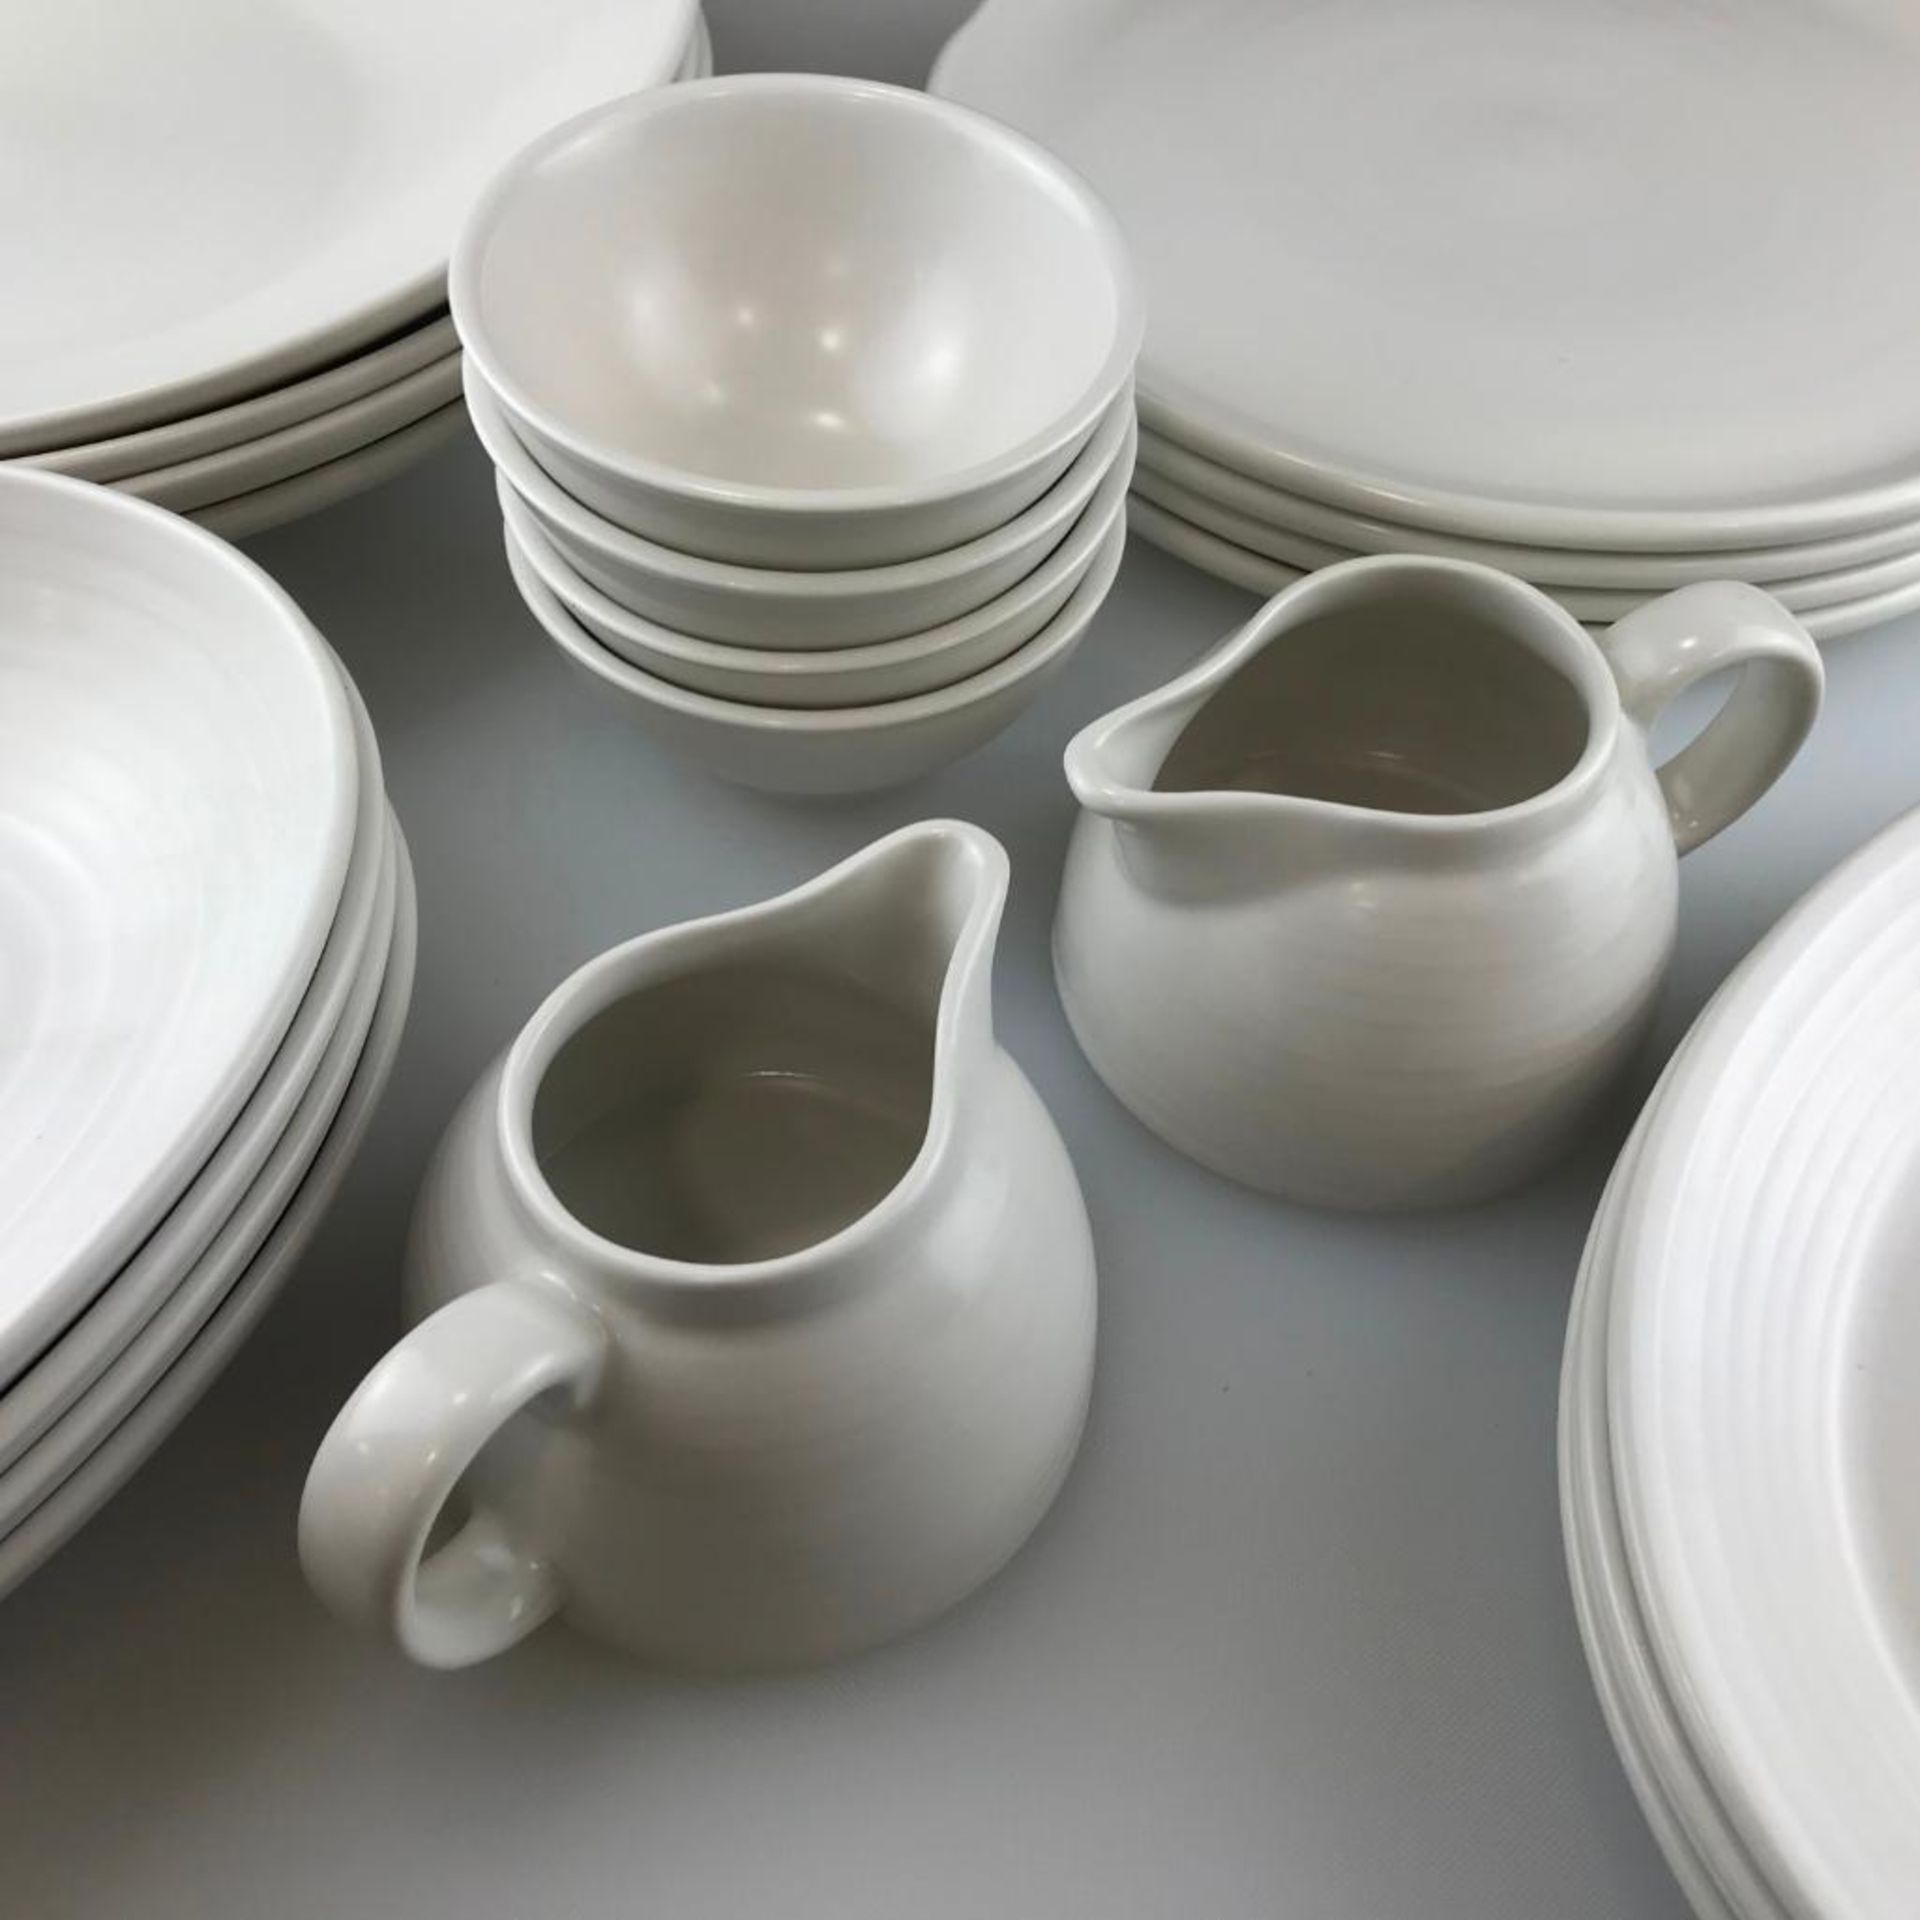 22 PIECE DUDSON EVO PEARL DINNERWARE SET, MADE IN ENGLAND - Image 6 of 8